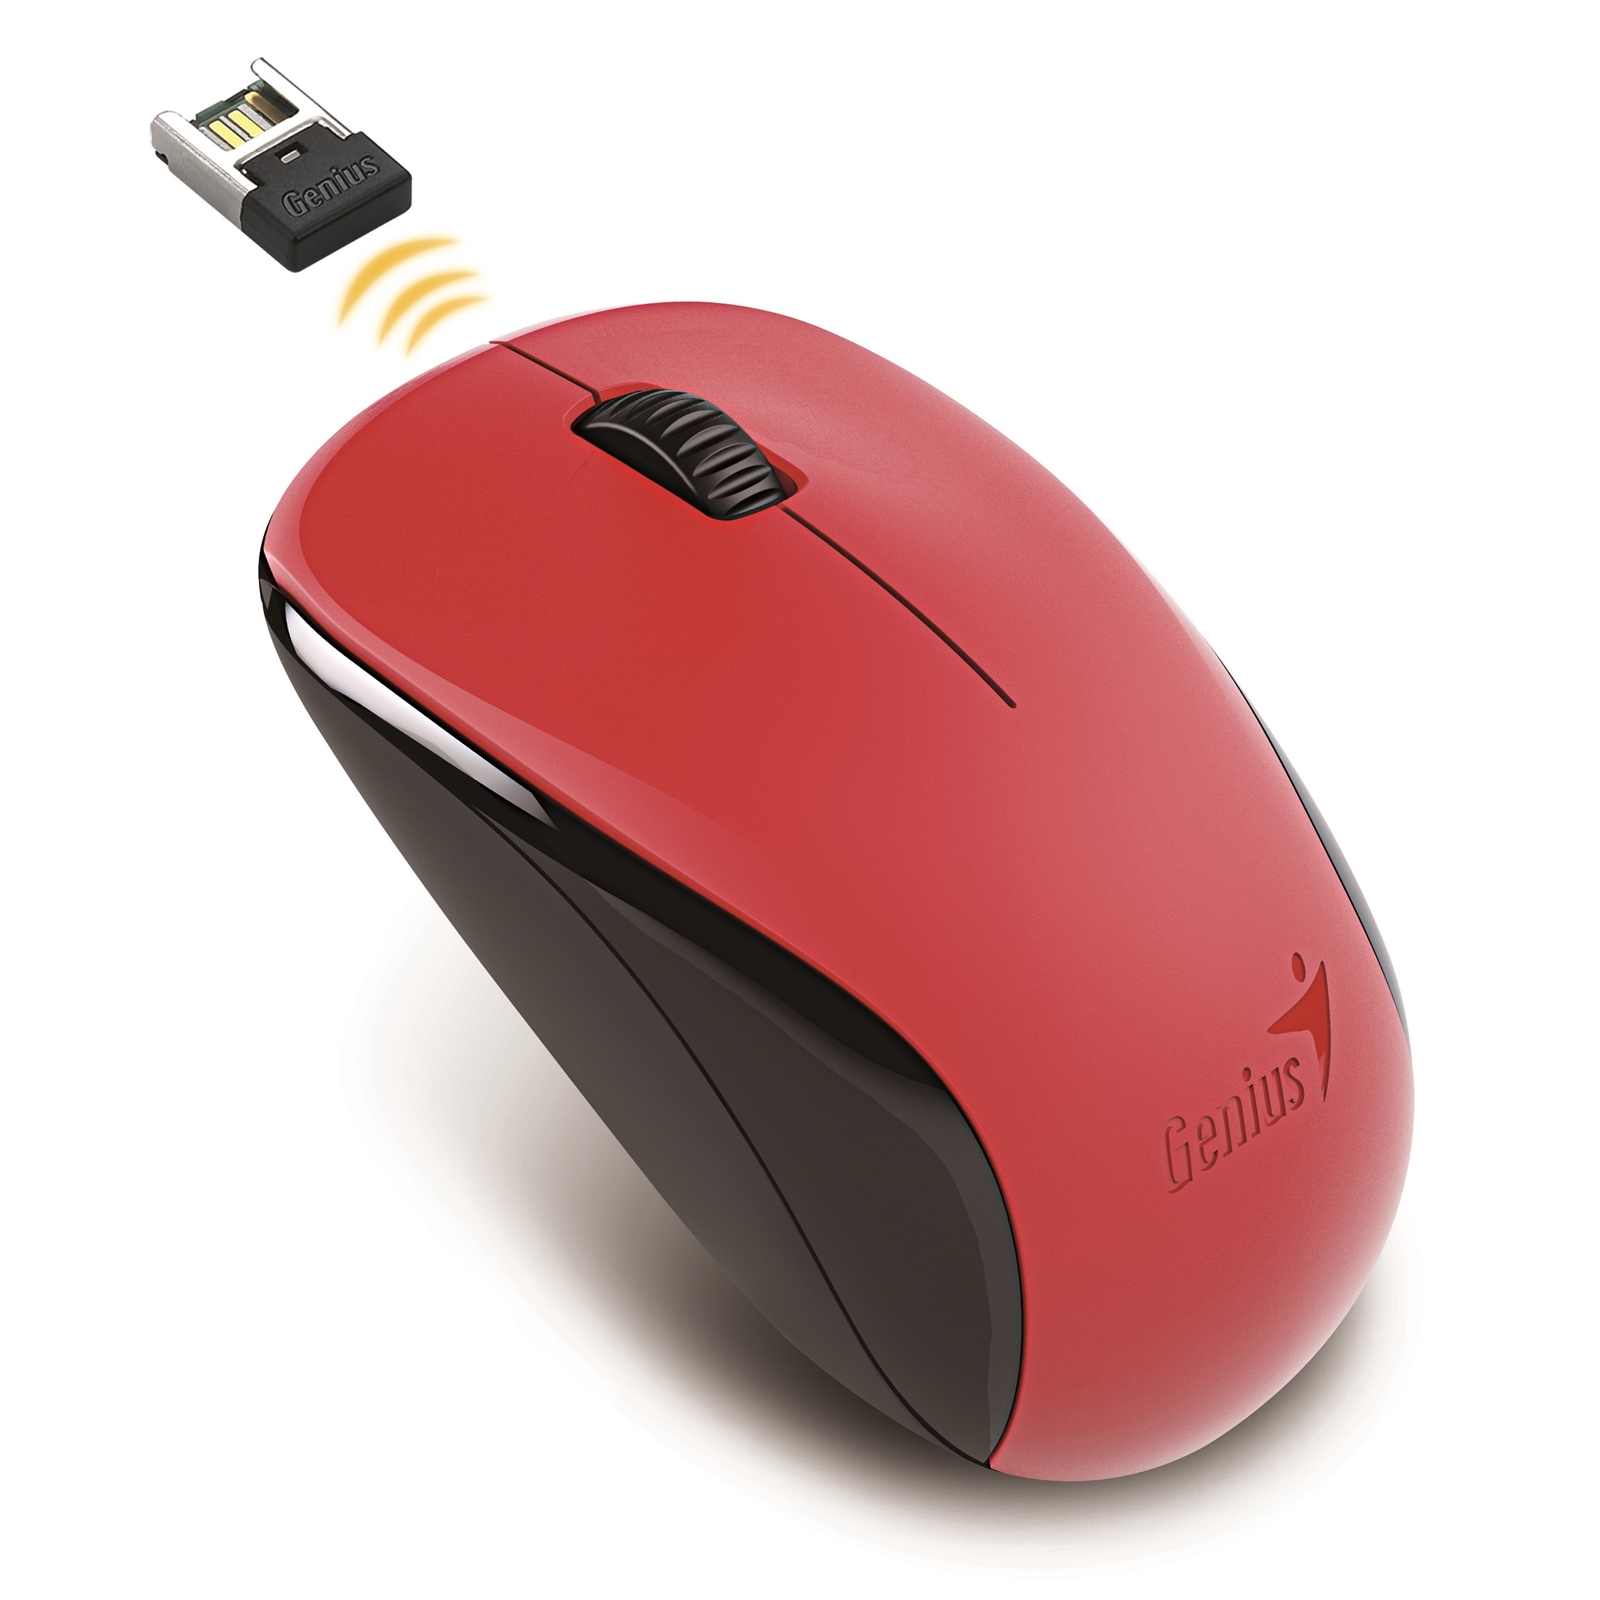 Genius NX-7000 Wireless Mouse, 2.4 GHz with USB Pico Receiver, Adjustable DPI levels up to 1200 DPI, 3 Button with Scroll Wheel, Ambidextrous Design, Red